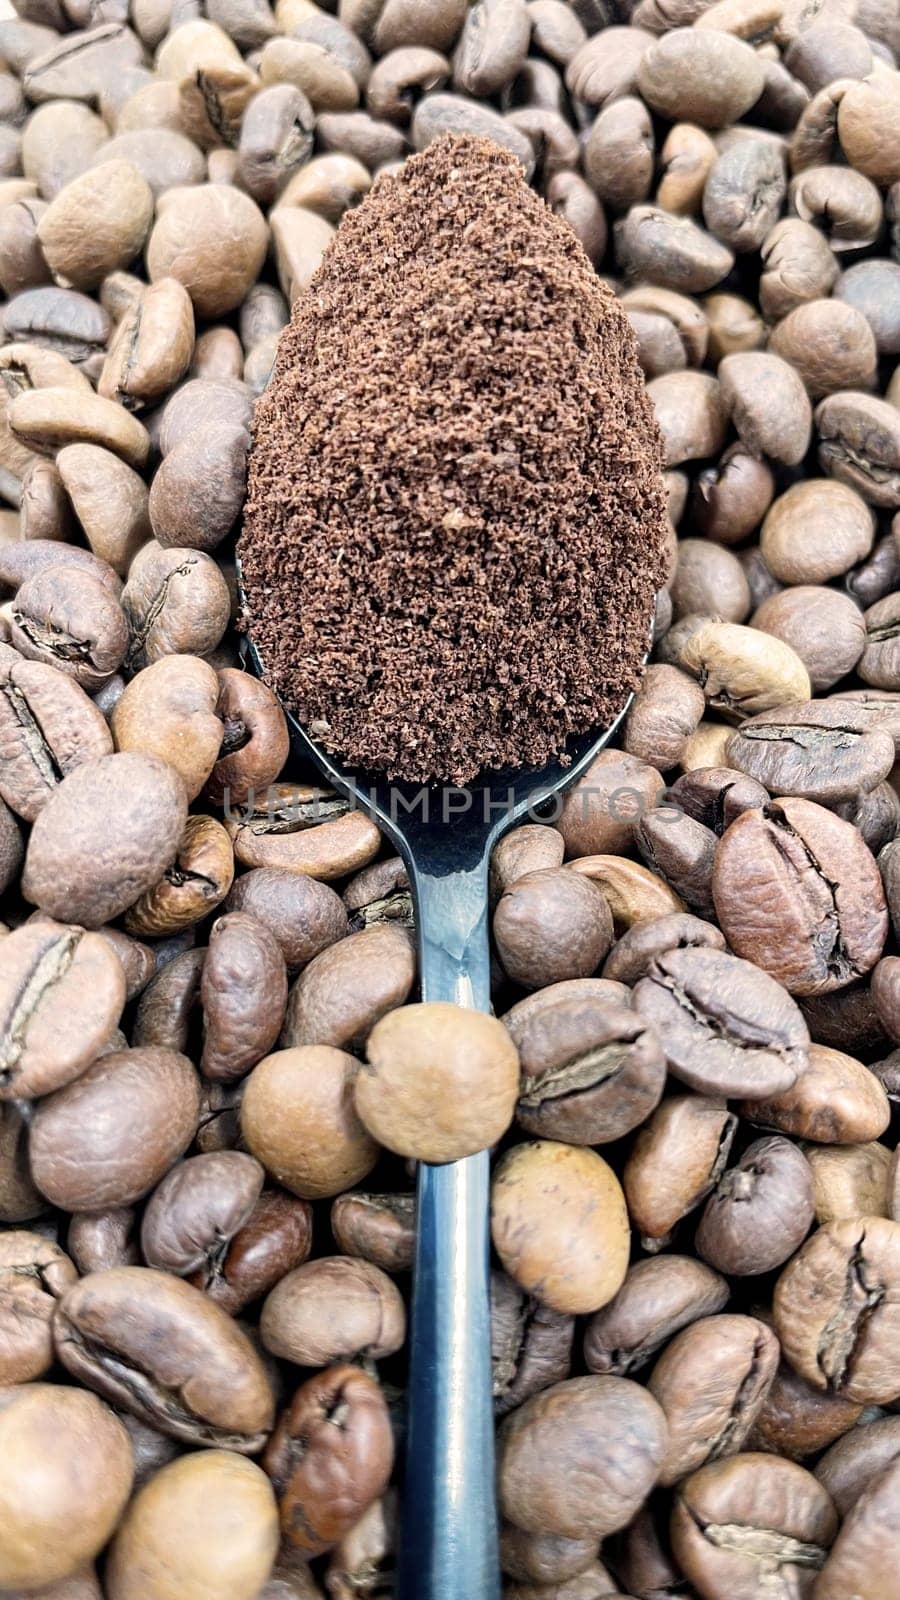 Against the background of roasted aromatic coffee beans lies a metal spoon filled with ground coffee. A drink made from roasted and ground beans from the coffee tree or coffee bush